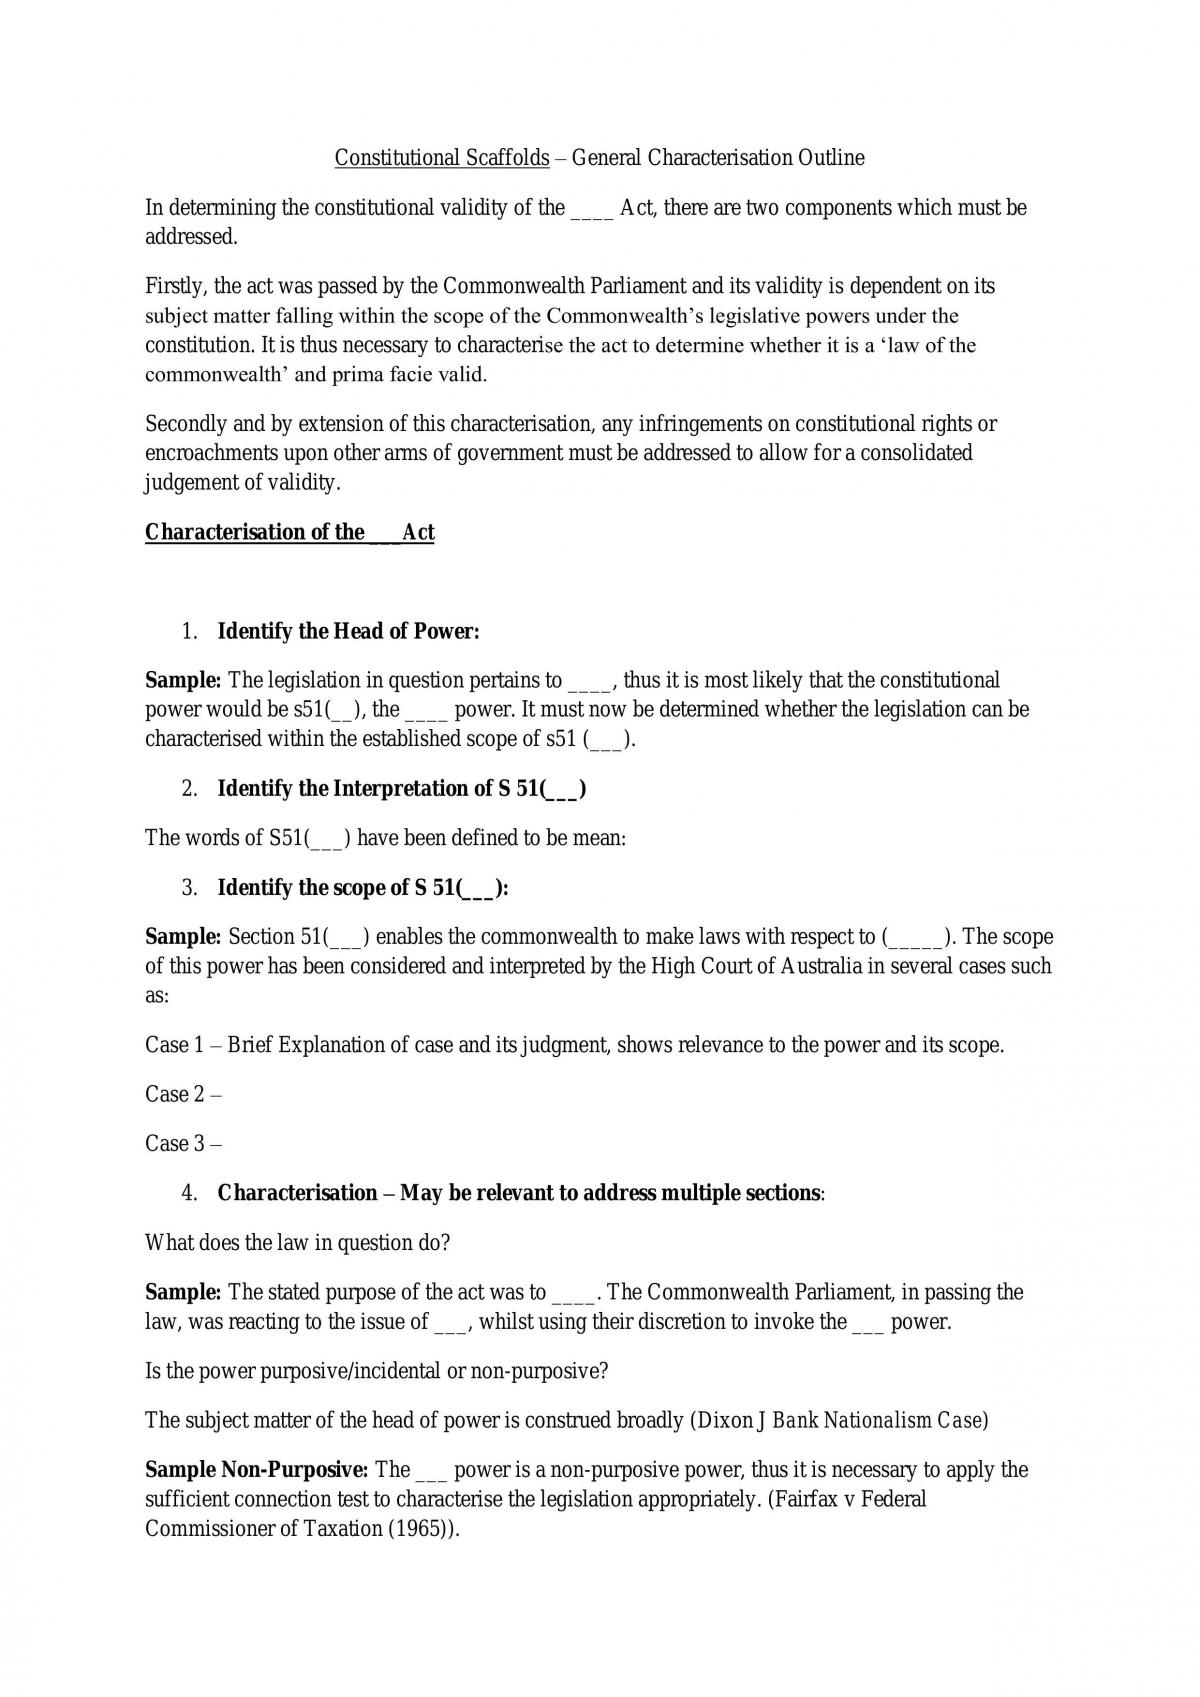 Constitutional Law - General Outline of Characterisation Process for Exam - Page 1